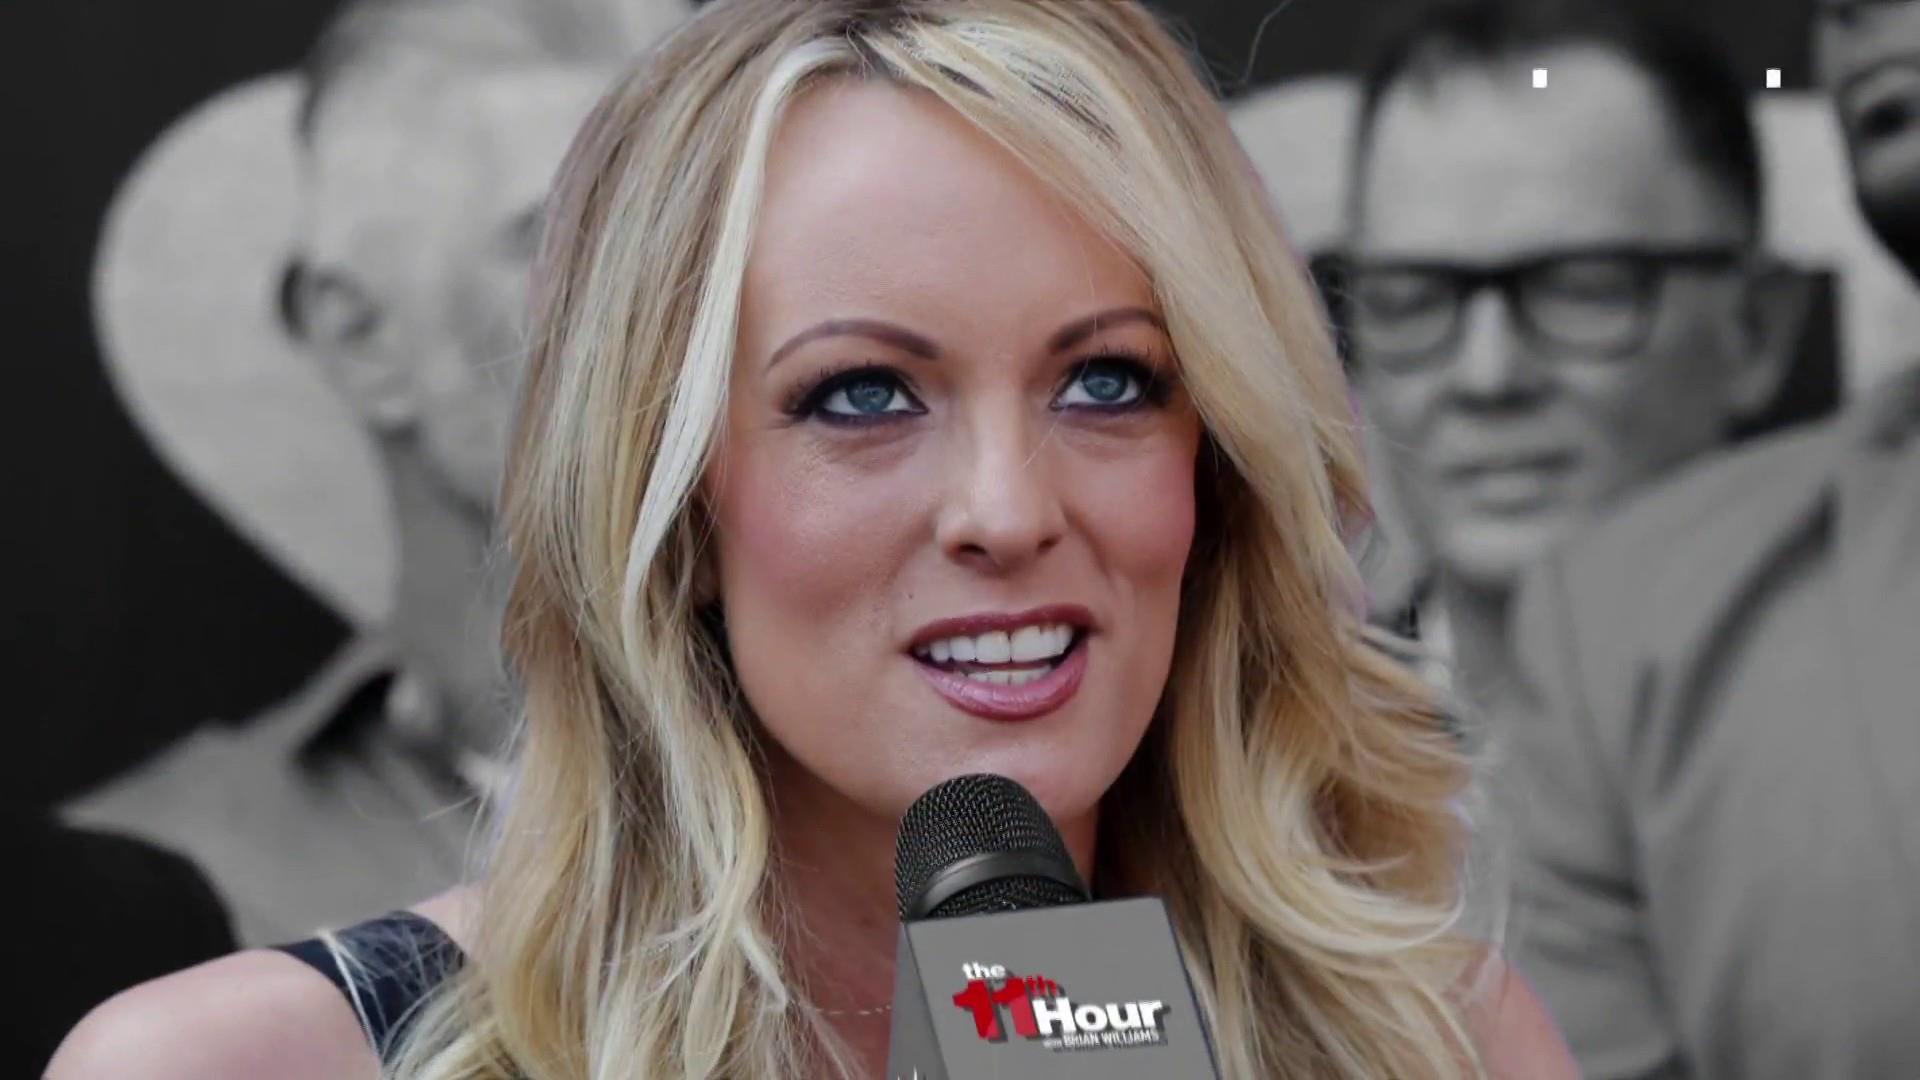 Stormy Daniels lawsuit: My old lawyer was a 'puppet' for Trump